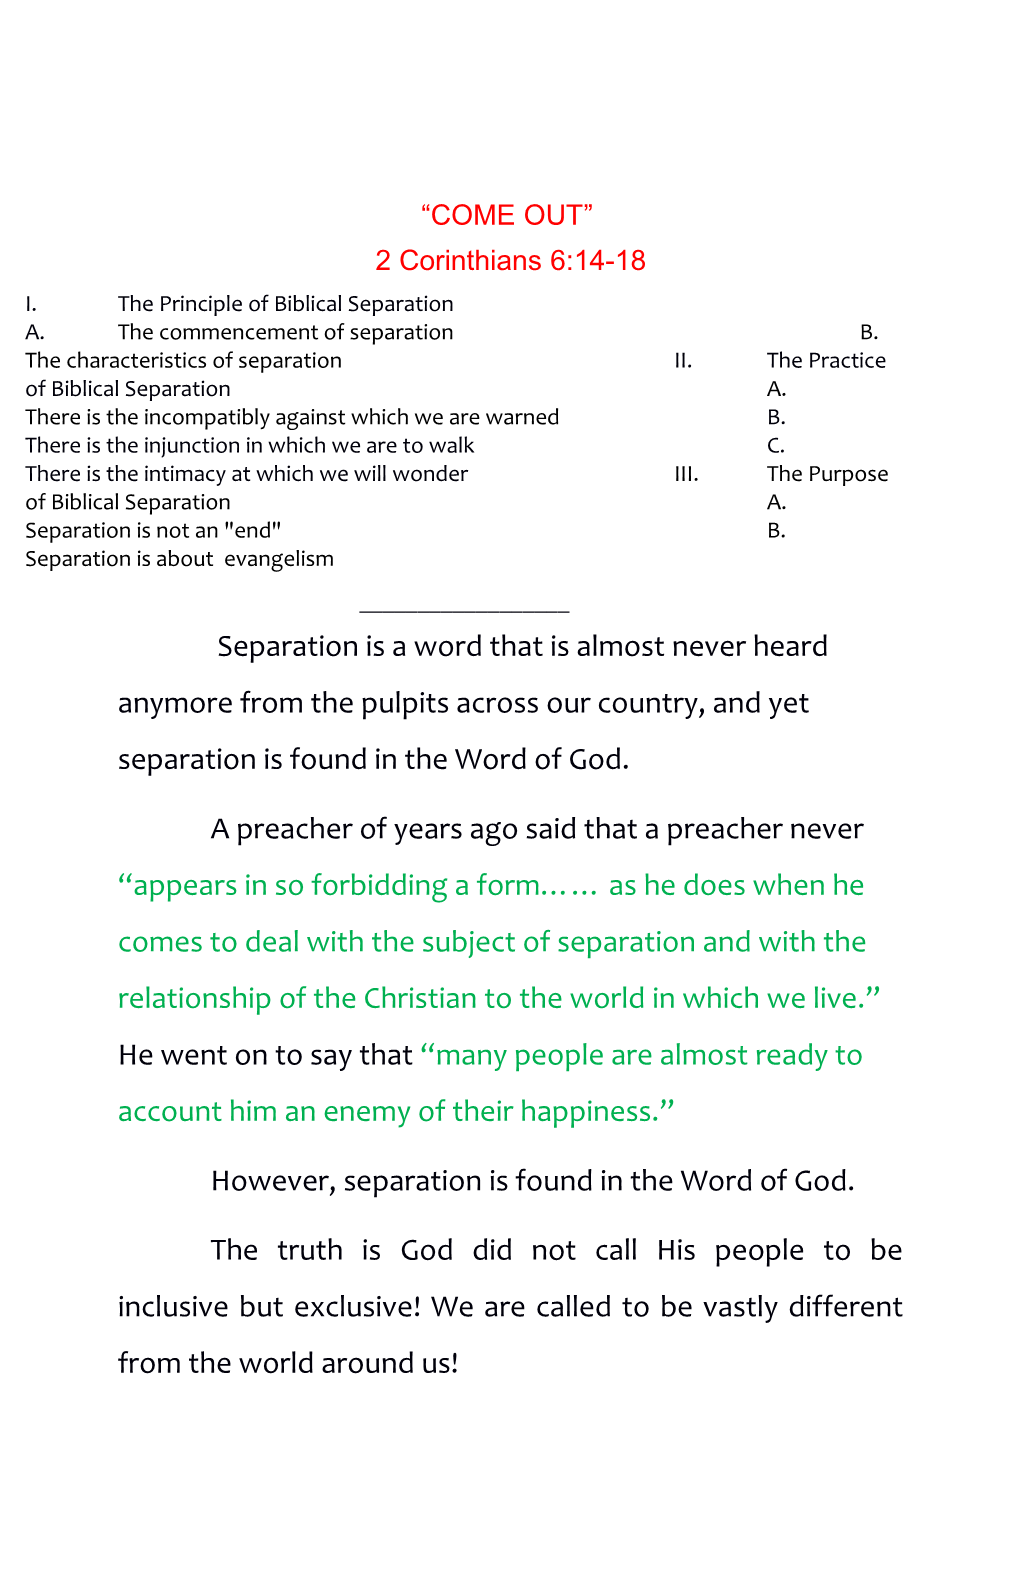 However, Separation Is Found in the Word of God